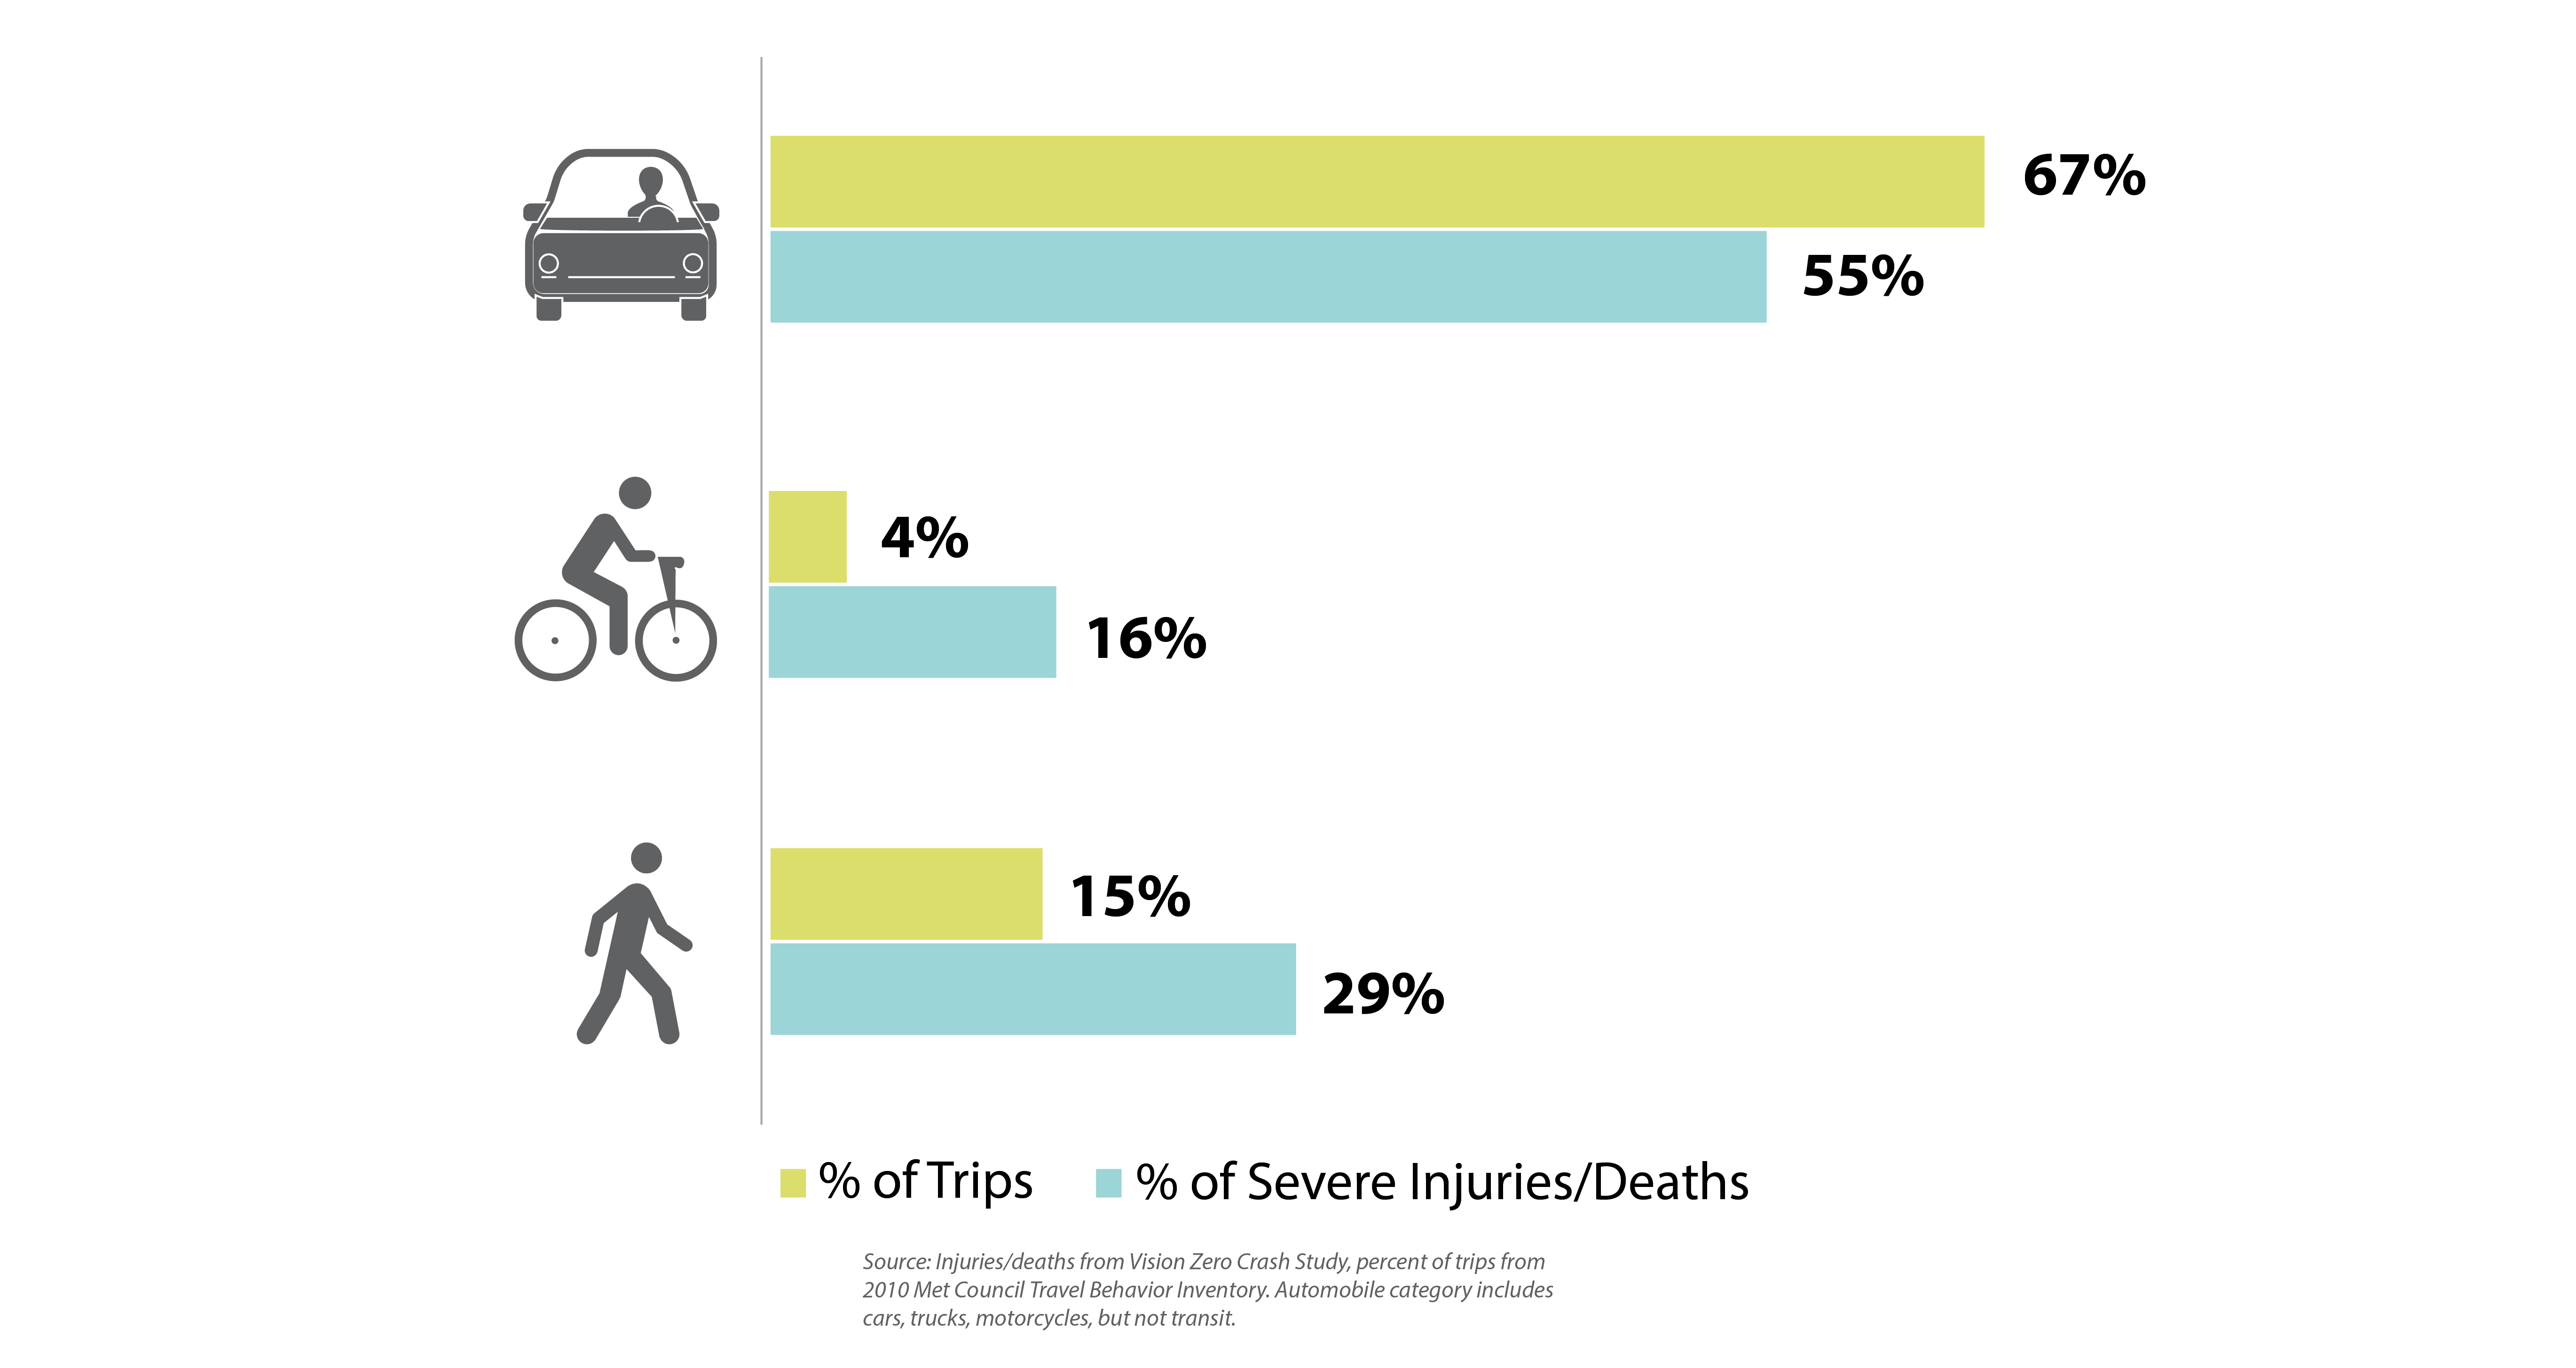 Chart showing percent of trips versus percent of severe injuries/death for cars, bike, and walking. Car: 67% of trips, 55% injury/death. Bike: 4% of trips, 16% injury/death. Ped: 15% trips, 29% injury/death